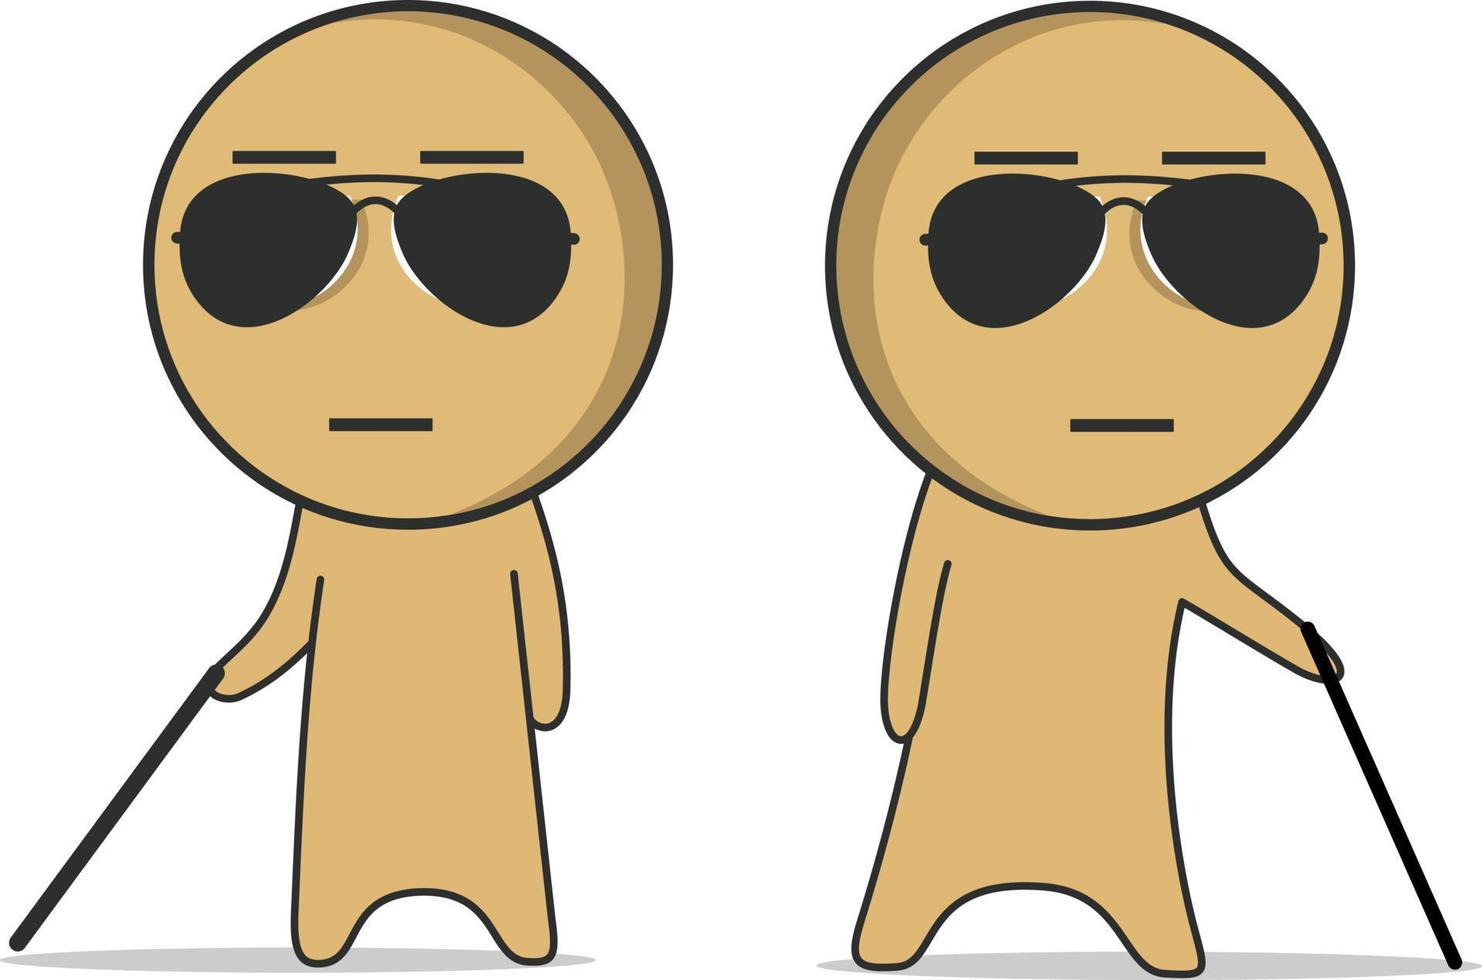 Blind man with glasses and a cane vector